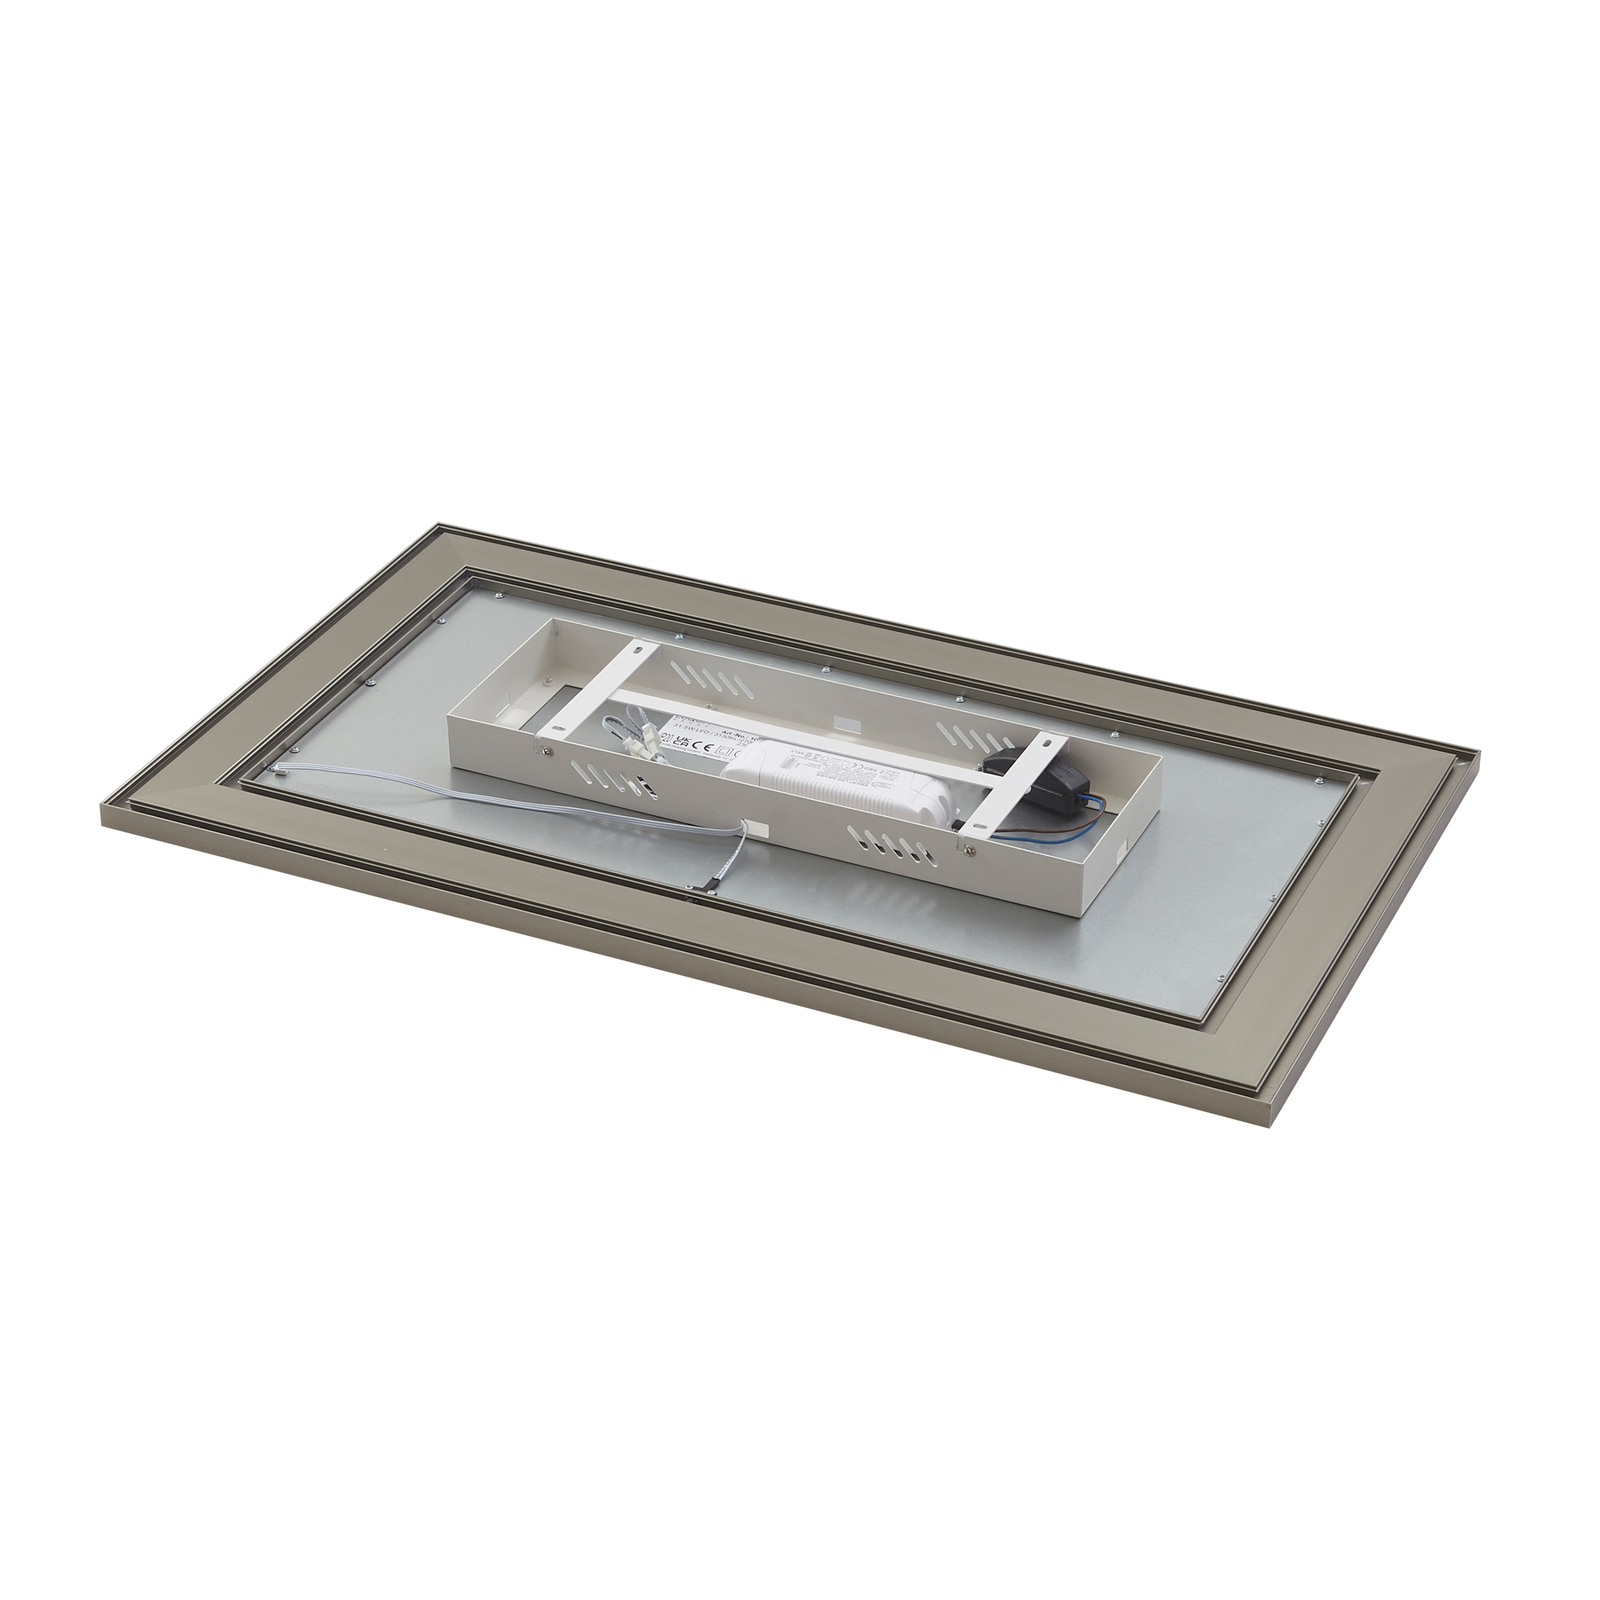 Lucande LED-Deckenlampe Leicy, nickel, 80 cm, RGBIC, CCT